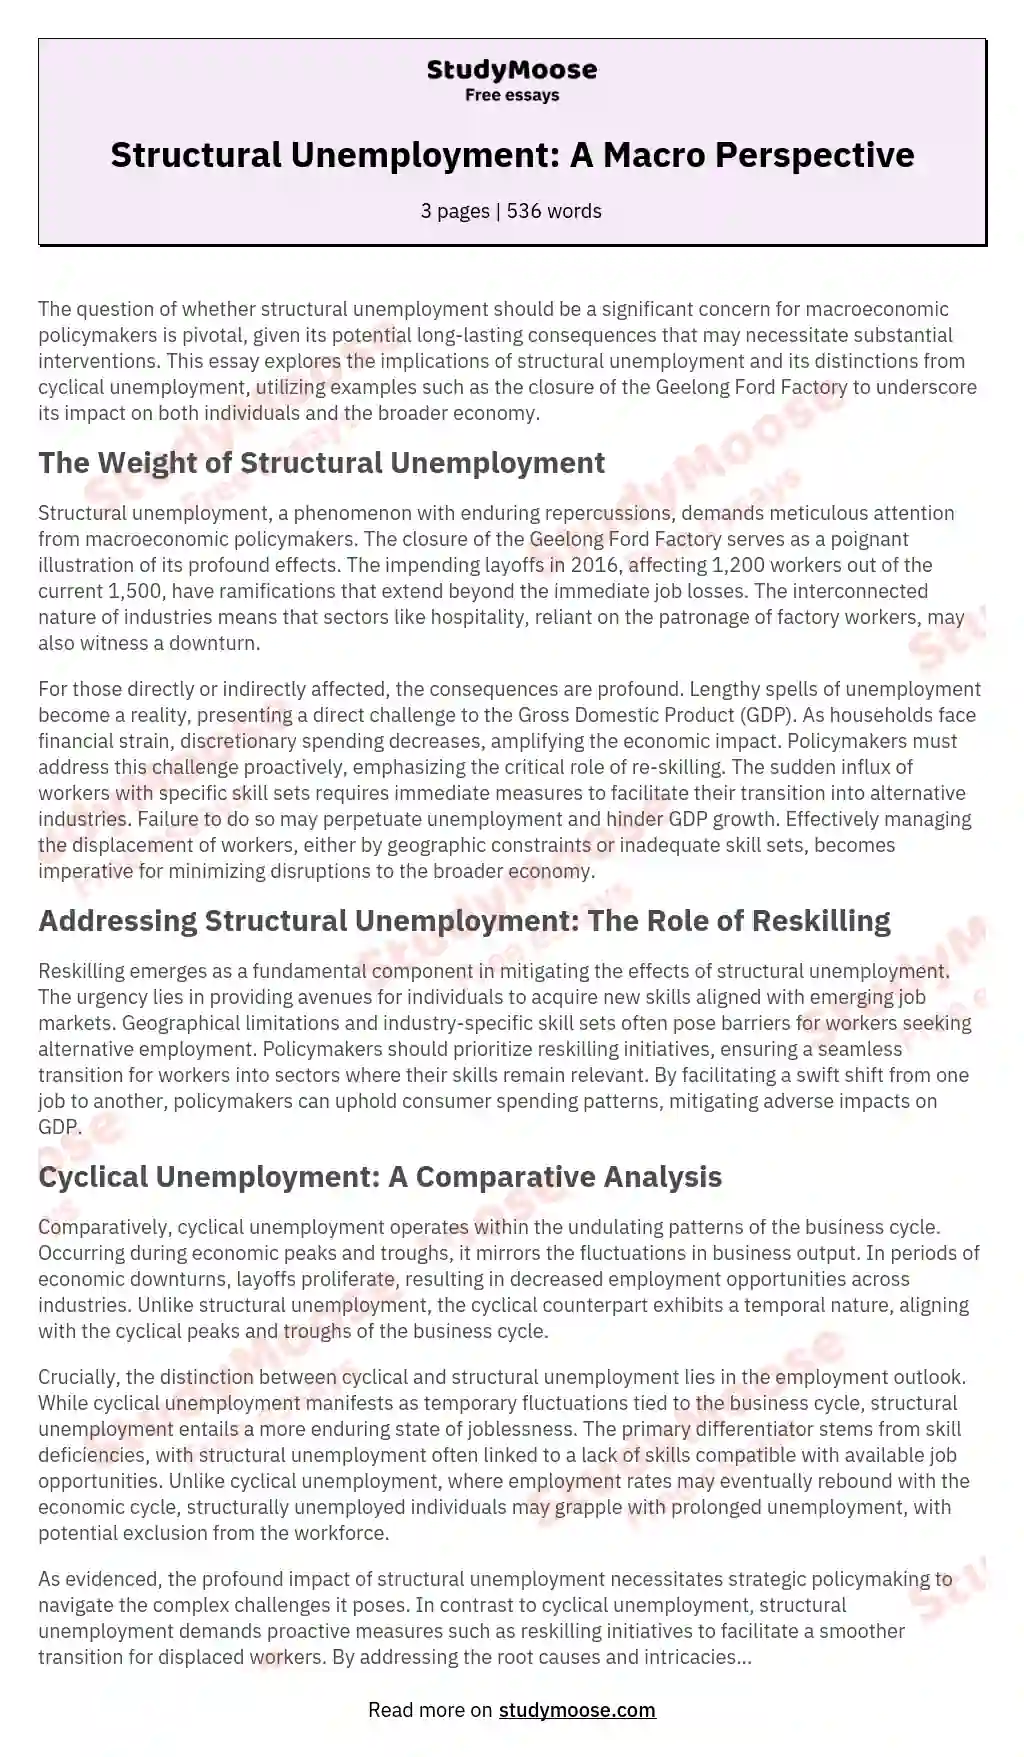 Structural Unemployment: A Macro Perspective essay